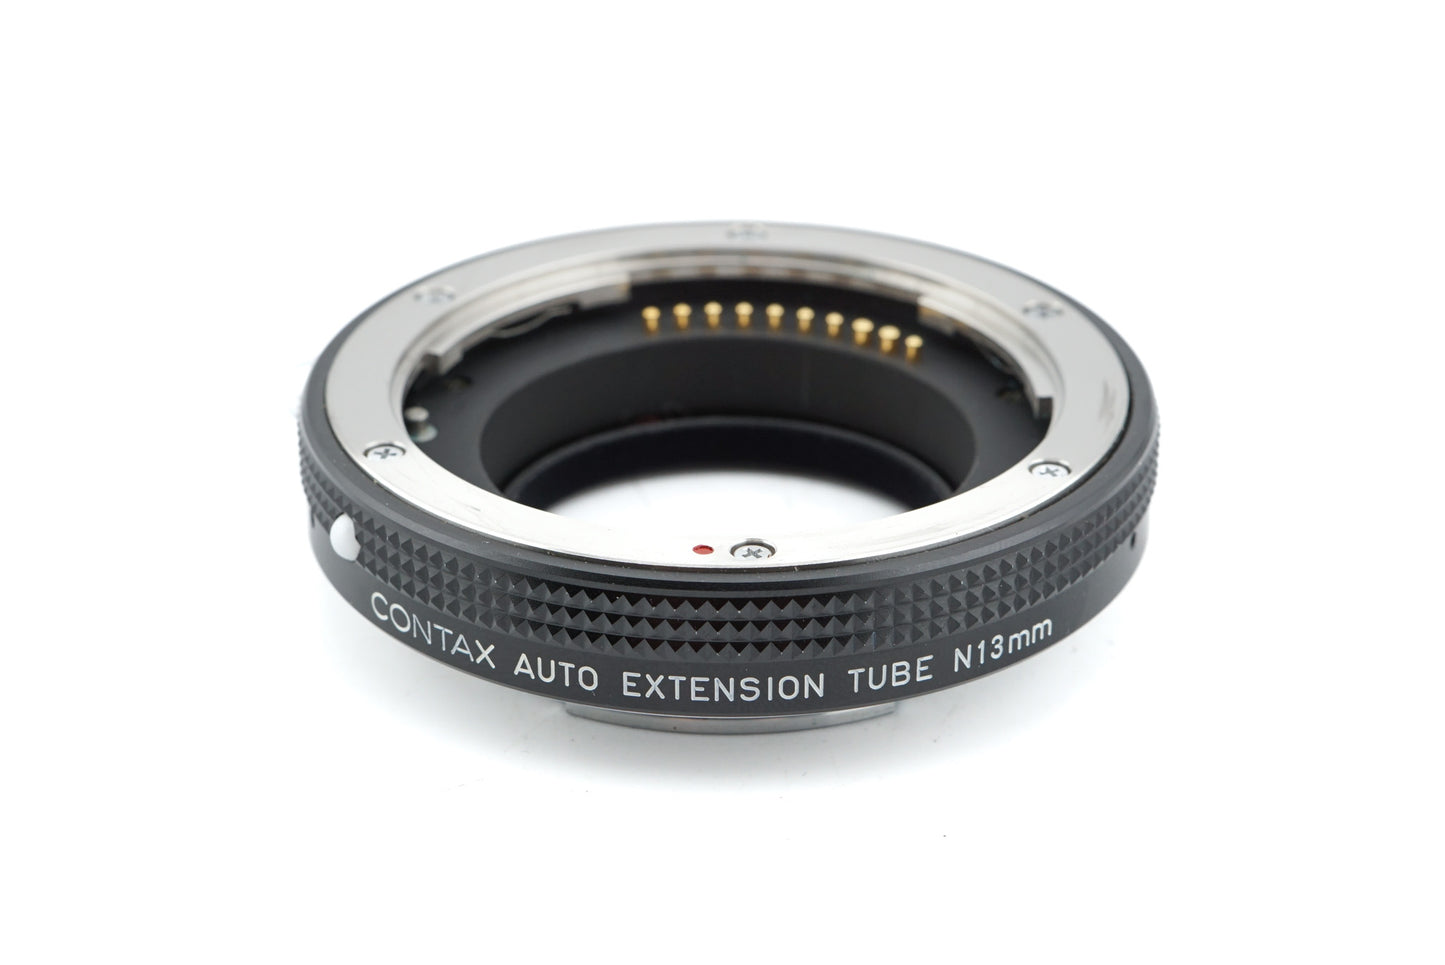 Contax Auto Extension Tube N13mm - Accessory